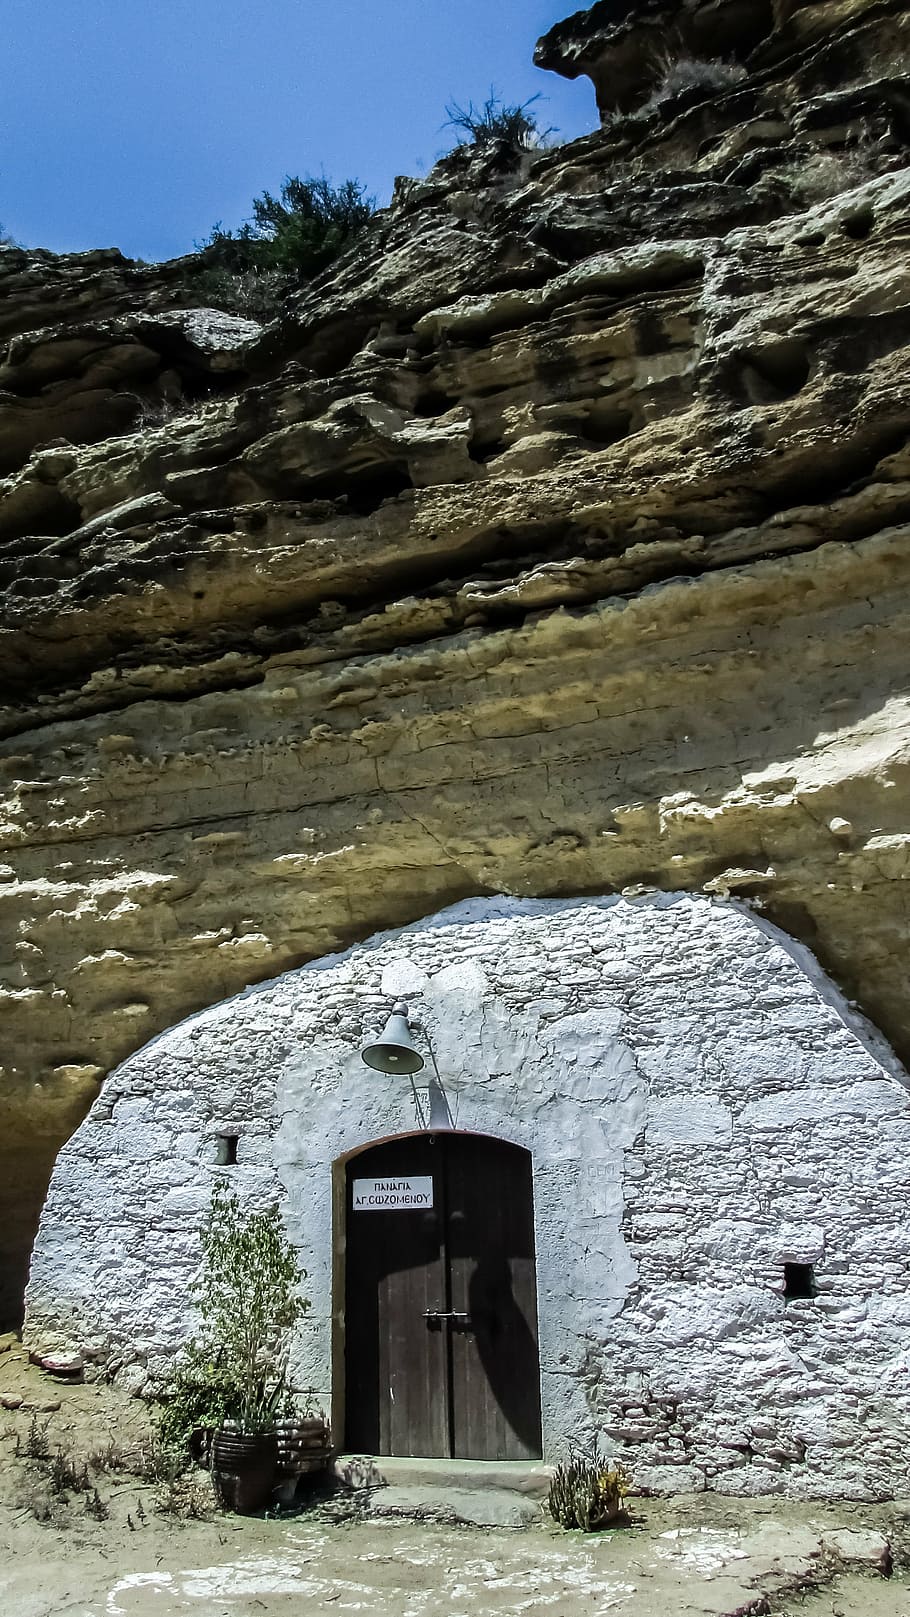 cyprus, ayios sozomenos, cave, church, village, abandoned, deserted, old, architecture, christianity